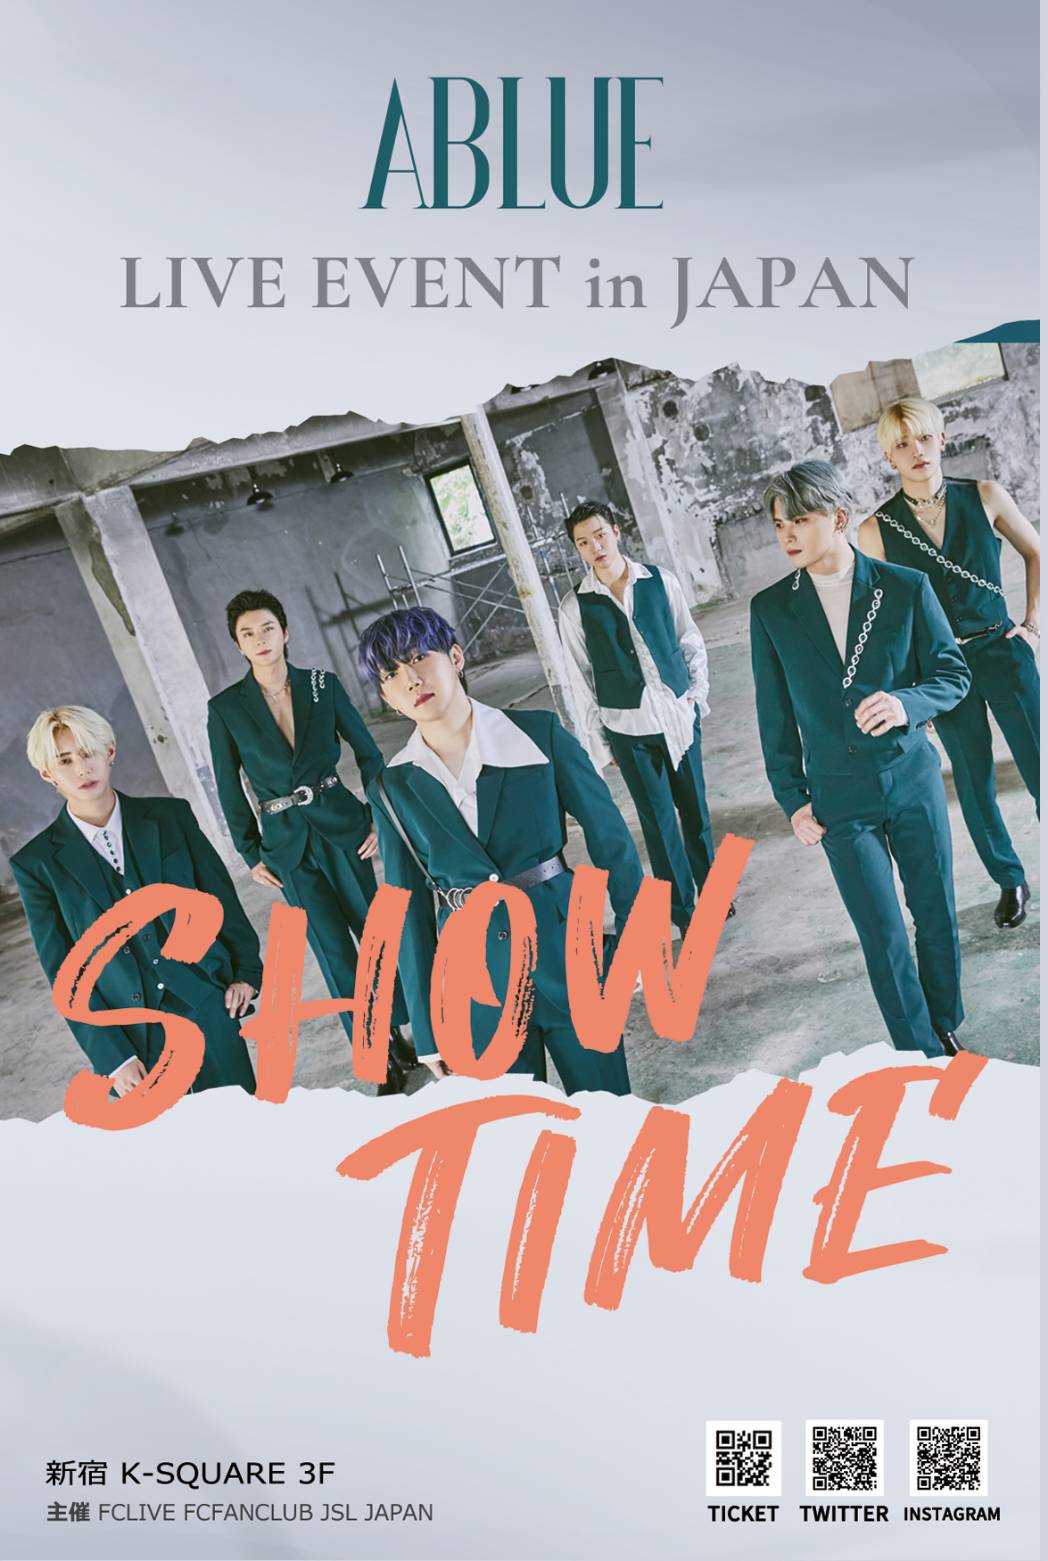 ABLUE LIVE EVENT in JAPAN SHOW TIME - SUKJUN DAY